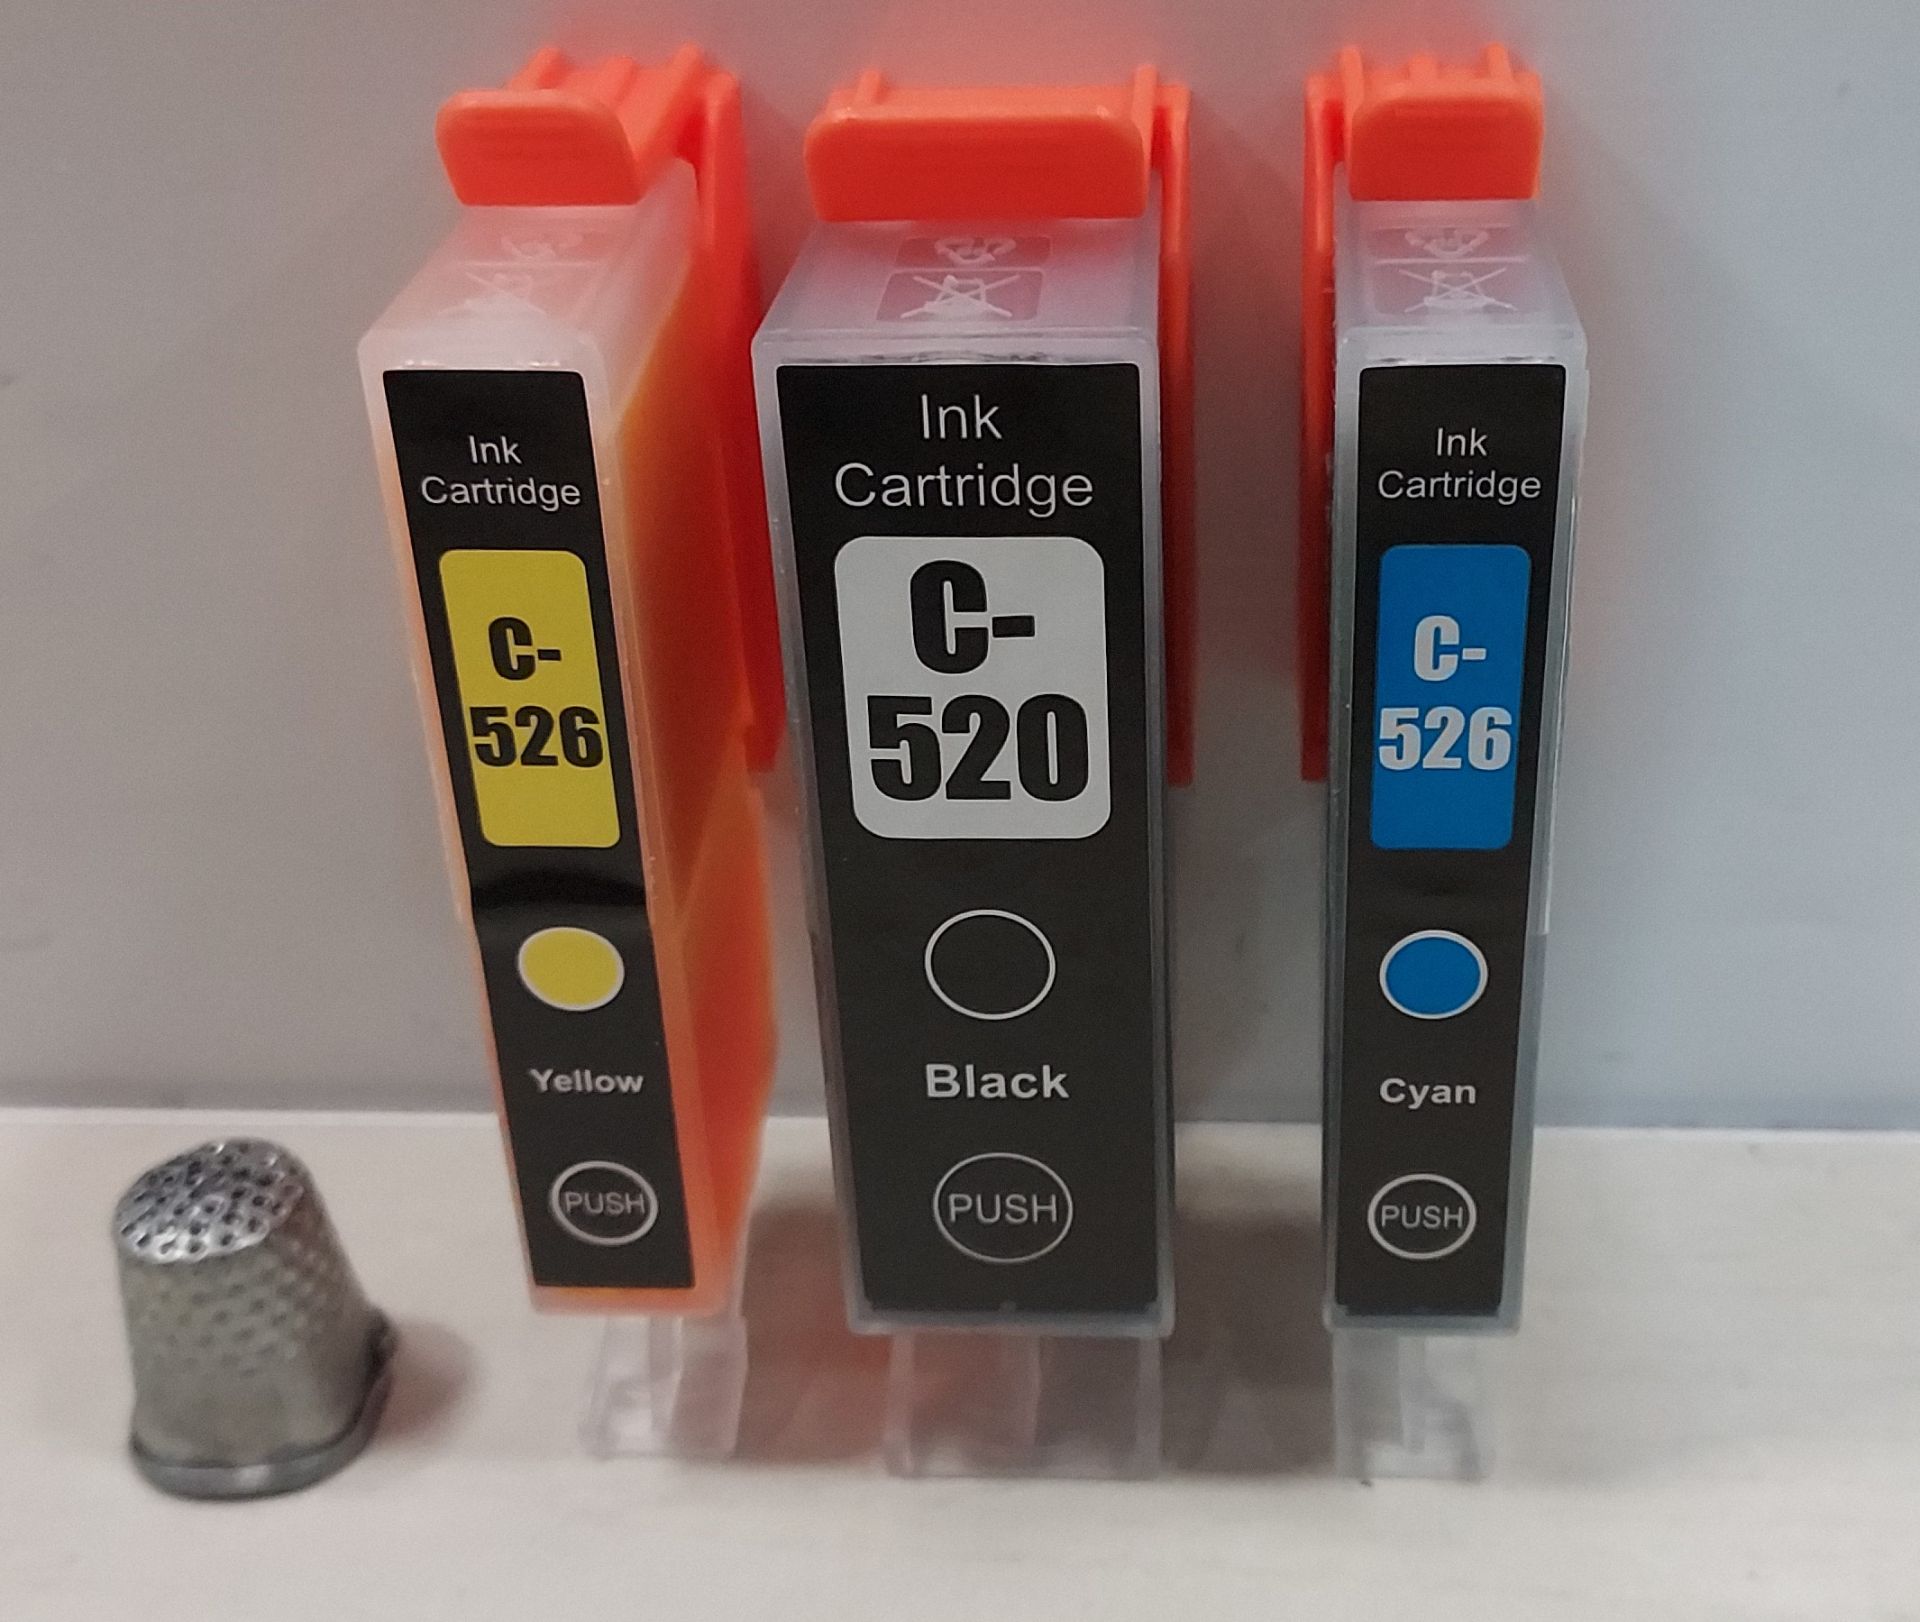 APPROX 500+ BRAND NEW CANON COMPATIBLE INK CARTRIDGES TO INCLUDE MODELS - C-526Y - C-520BK - C-